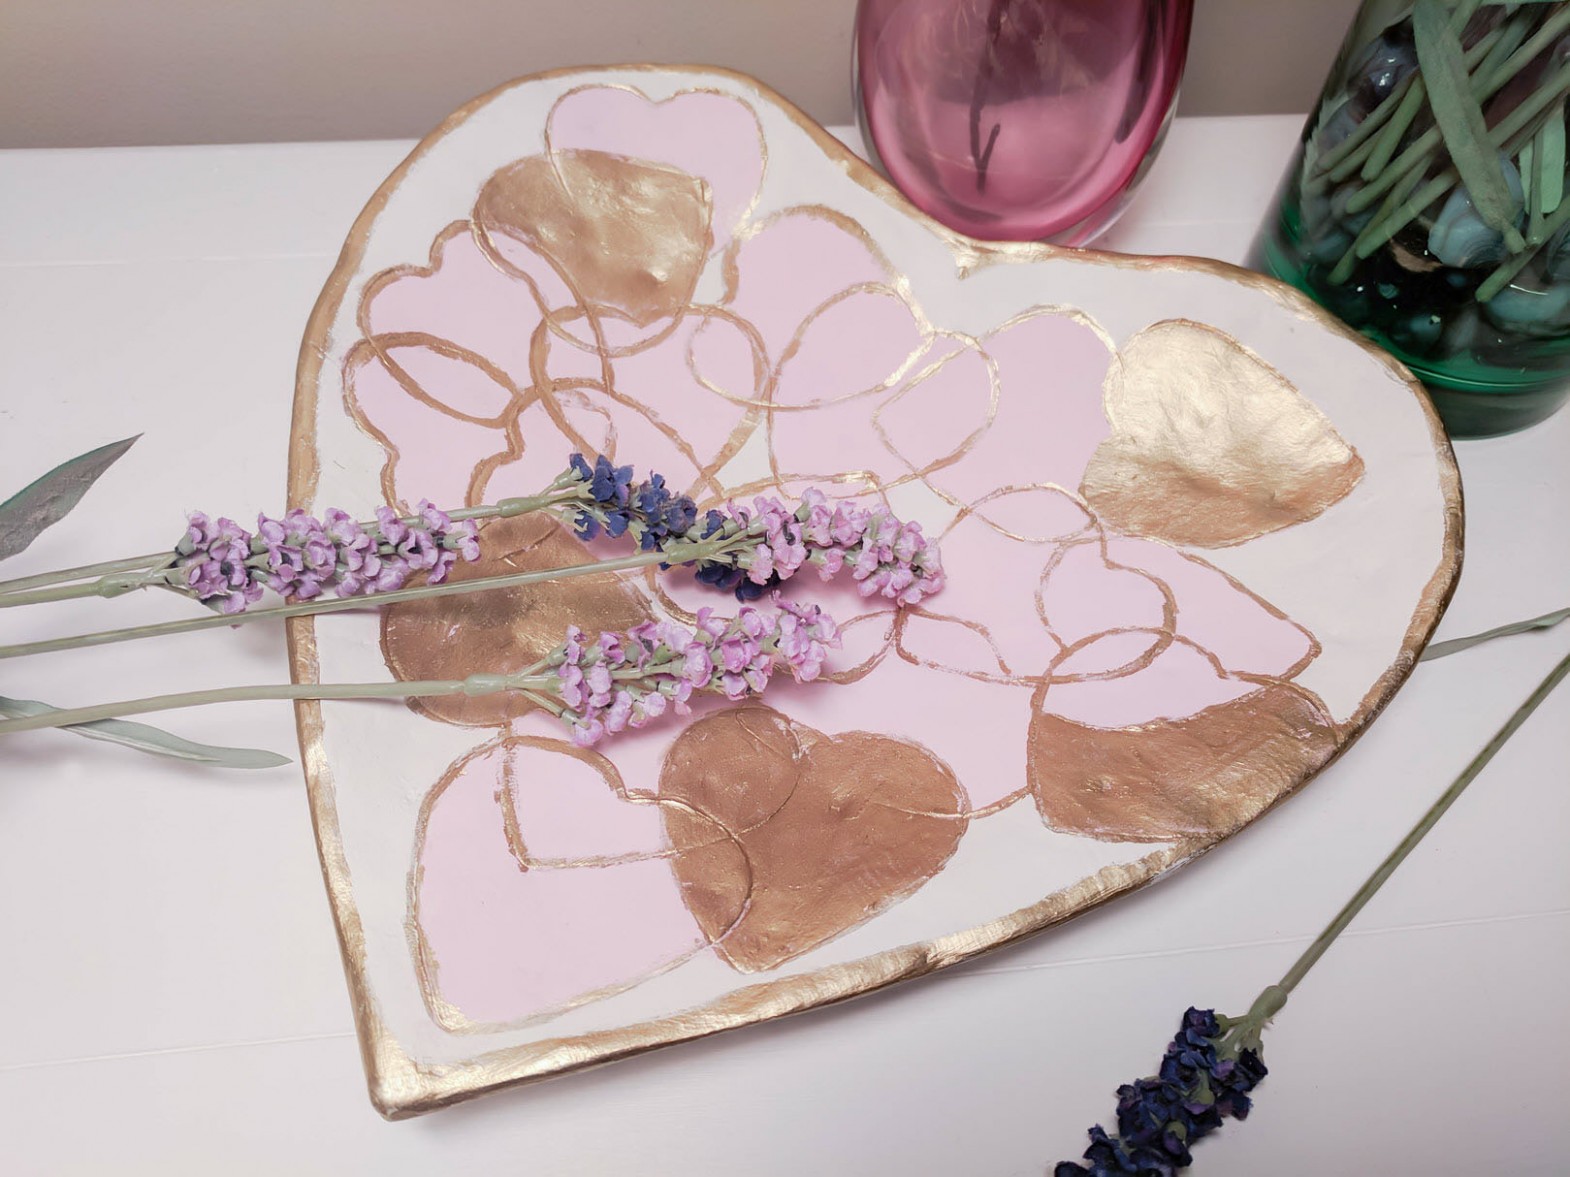 How To Make A Beautiful Diy Air Dry Clay Heart Dish When Can I Paint Air Dry Clay